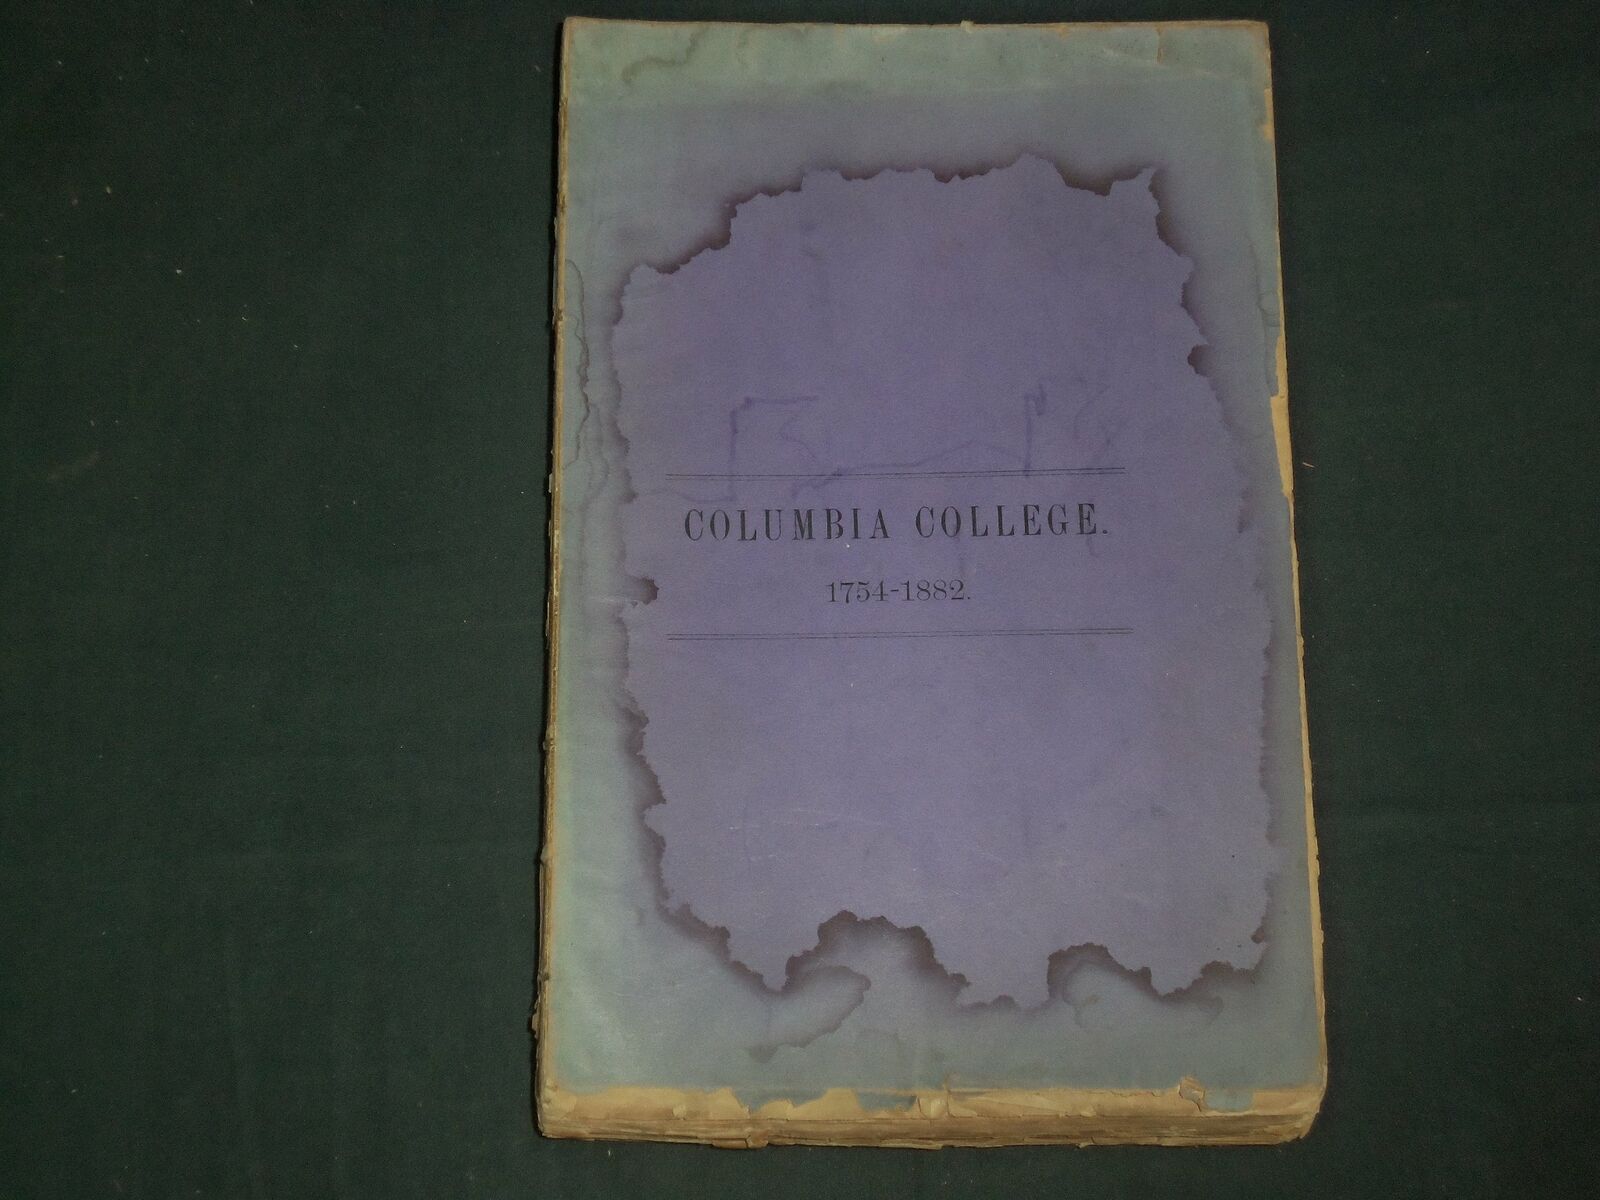 1882 COLUMBIA COLLEGE CATALOGUE OF ALUMNI AND OTHER GRADUATES 1754-1882 - J 4660